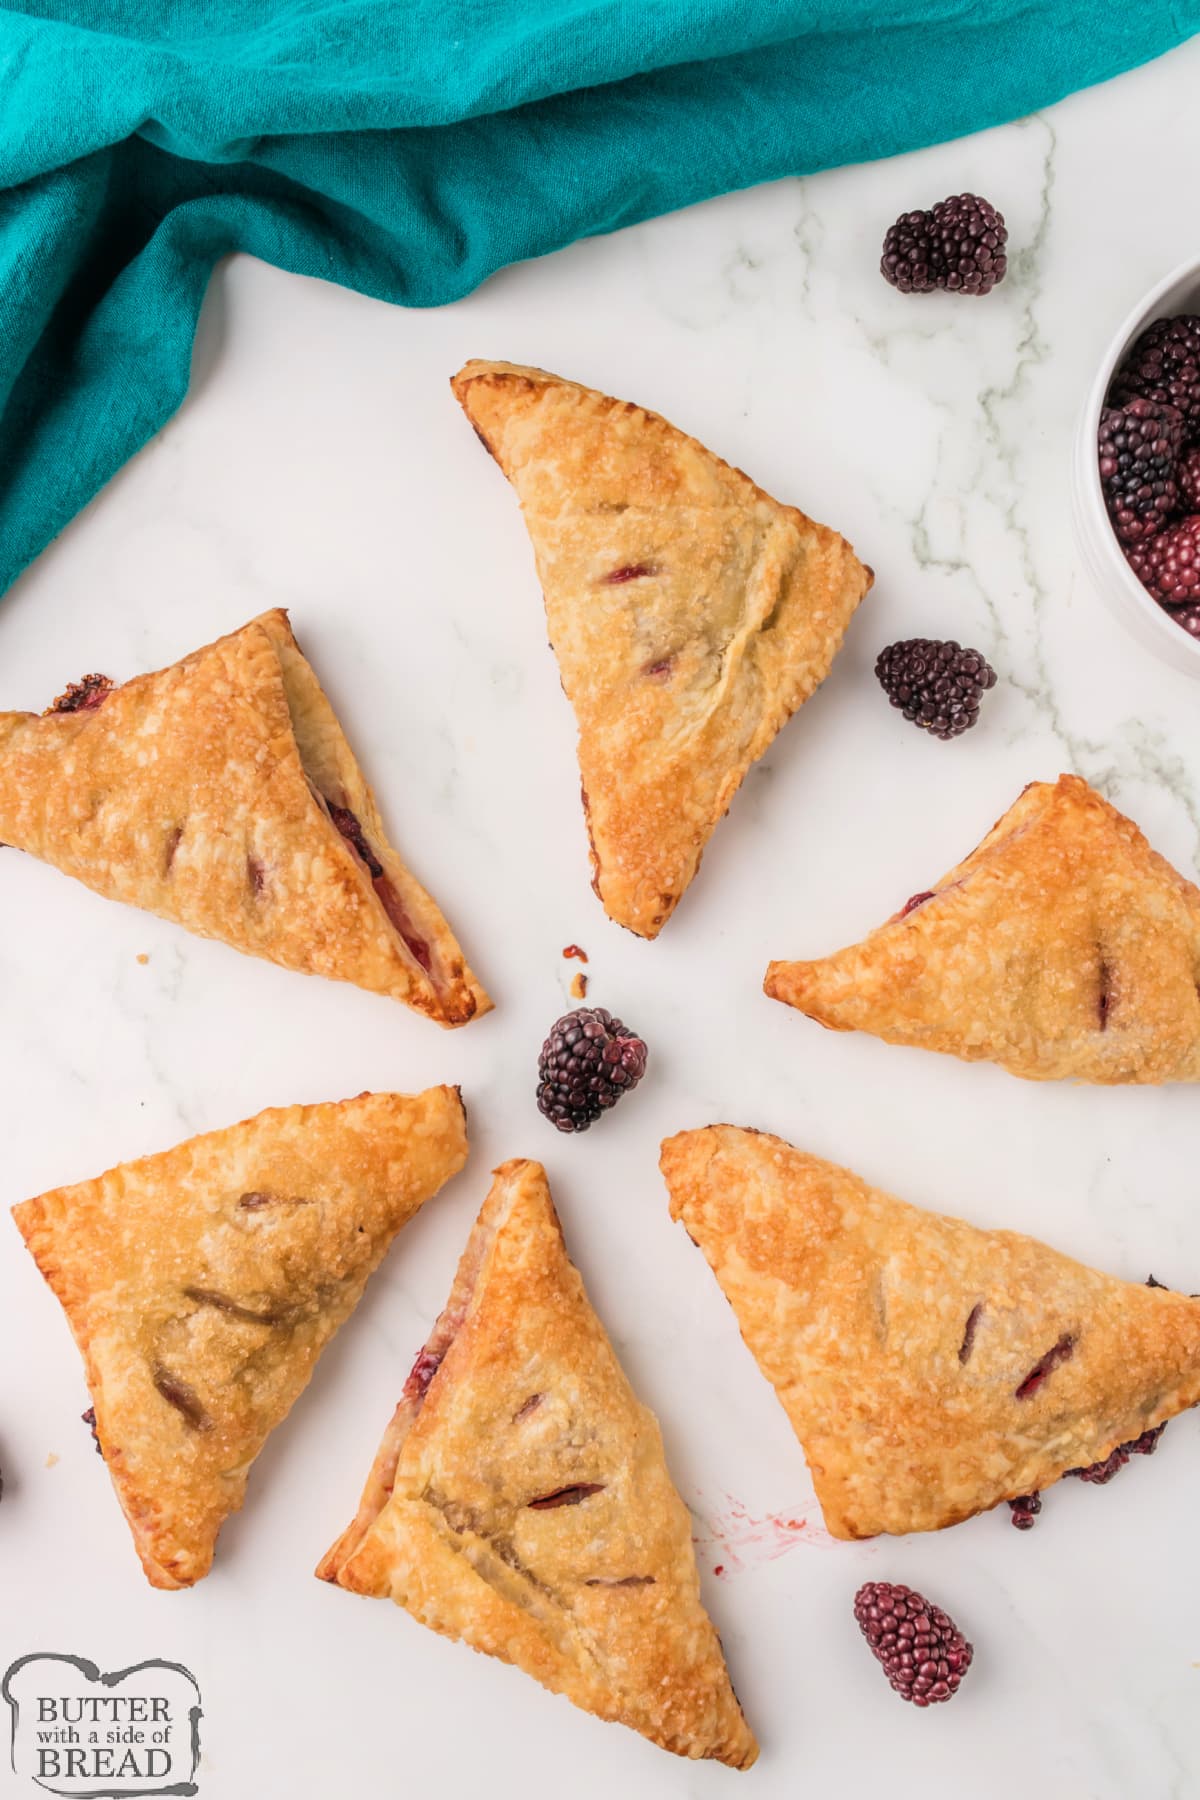 Homemade pastry with blackberries